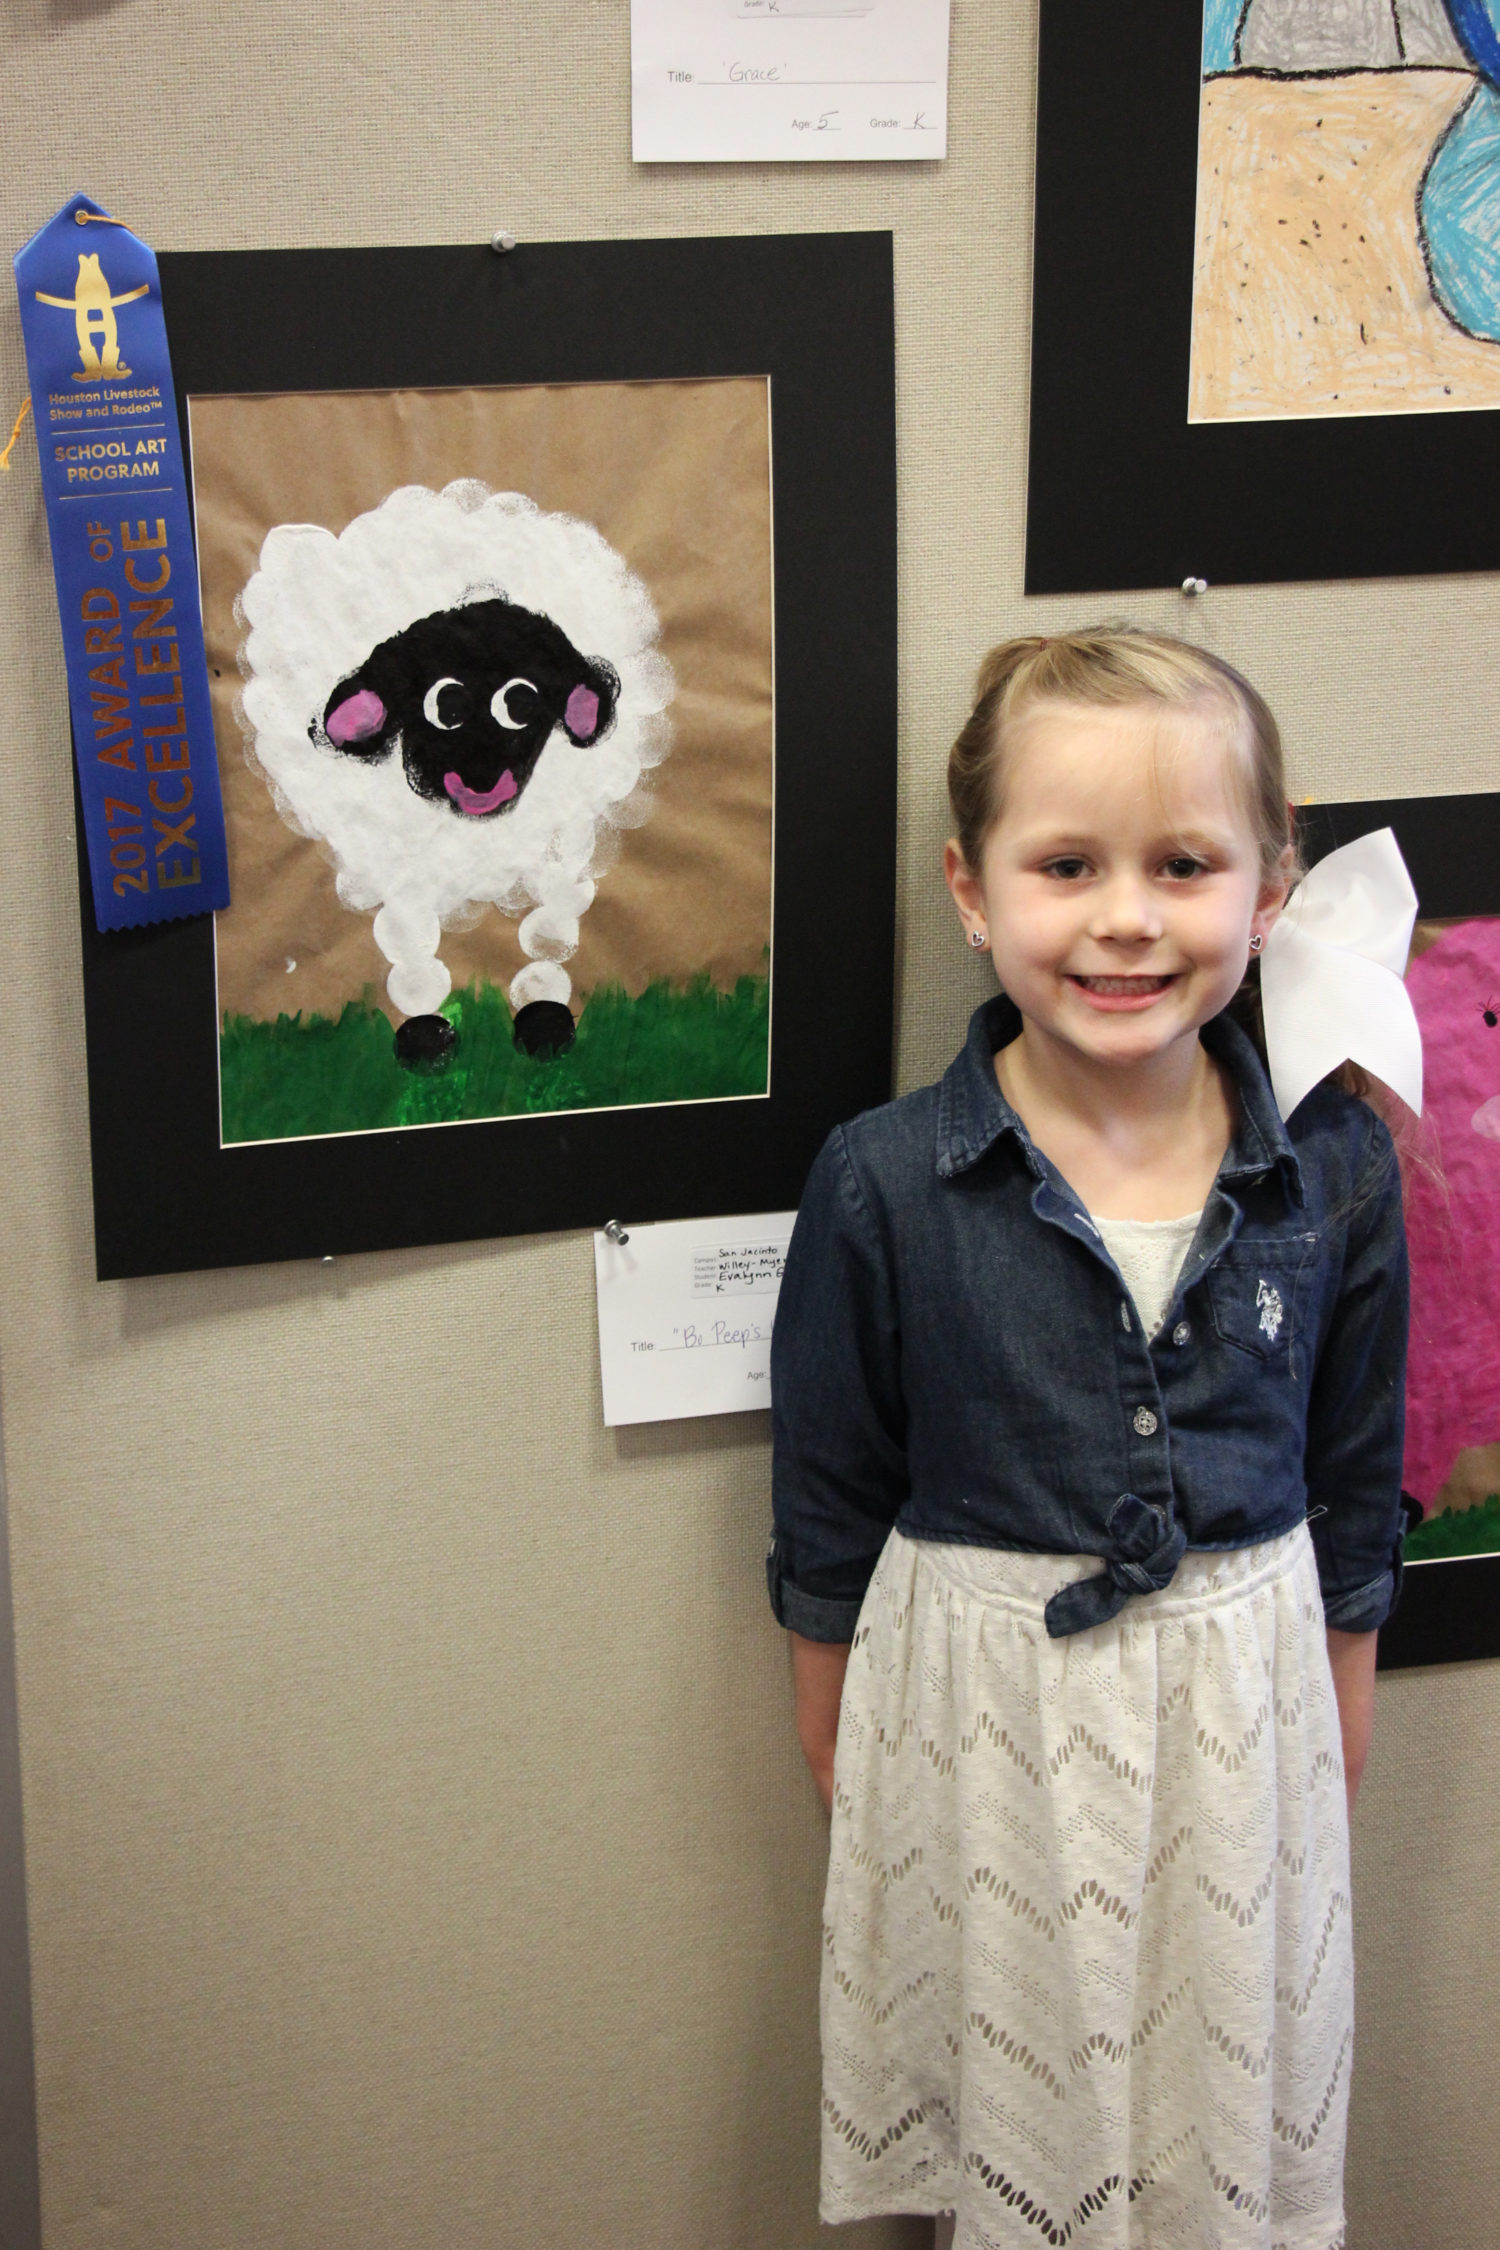 A student from San Jacinto proudly stands by her art at the Western Art Show.